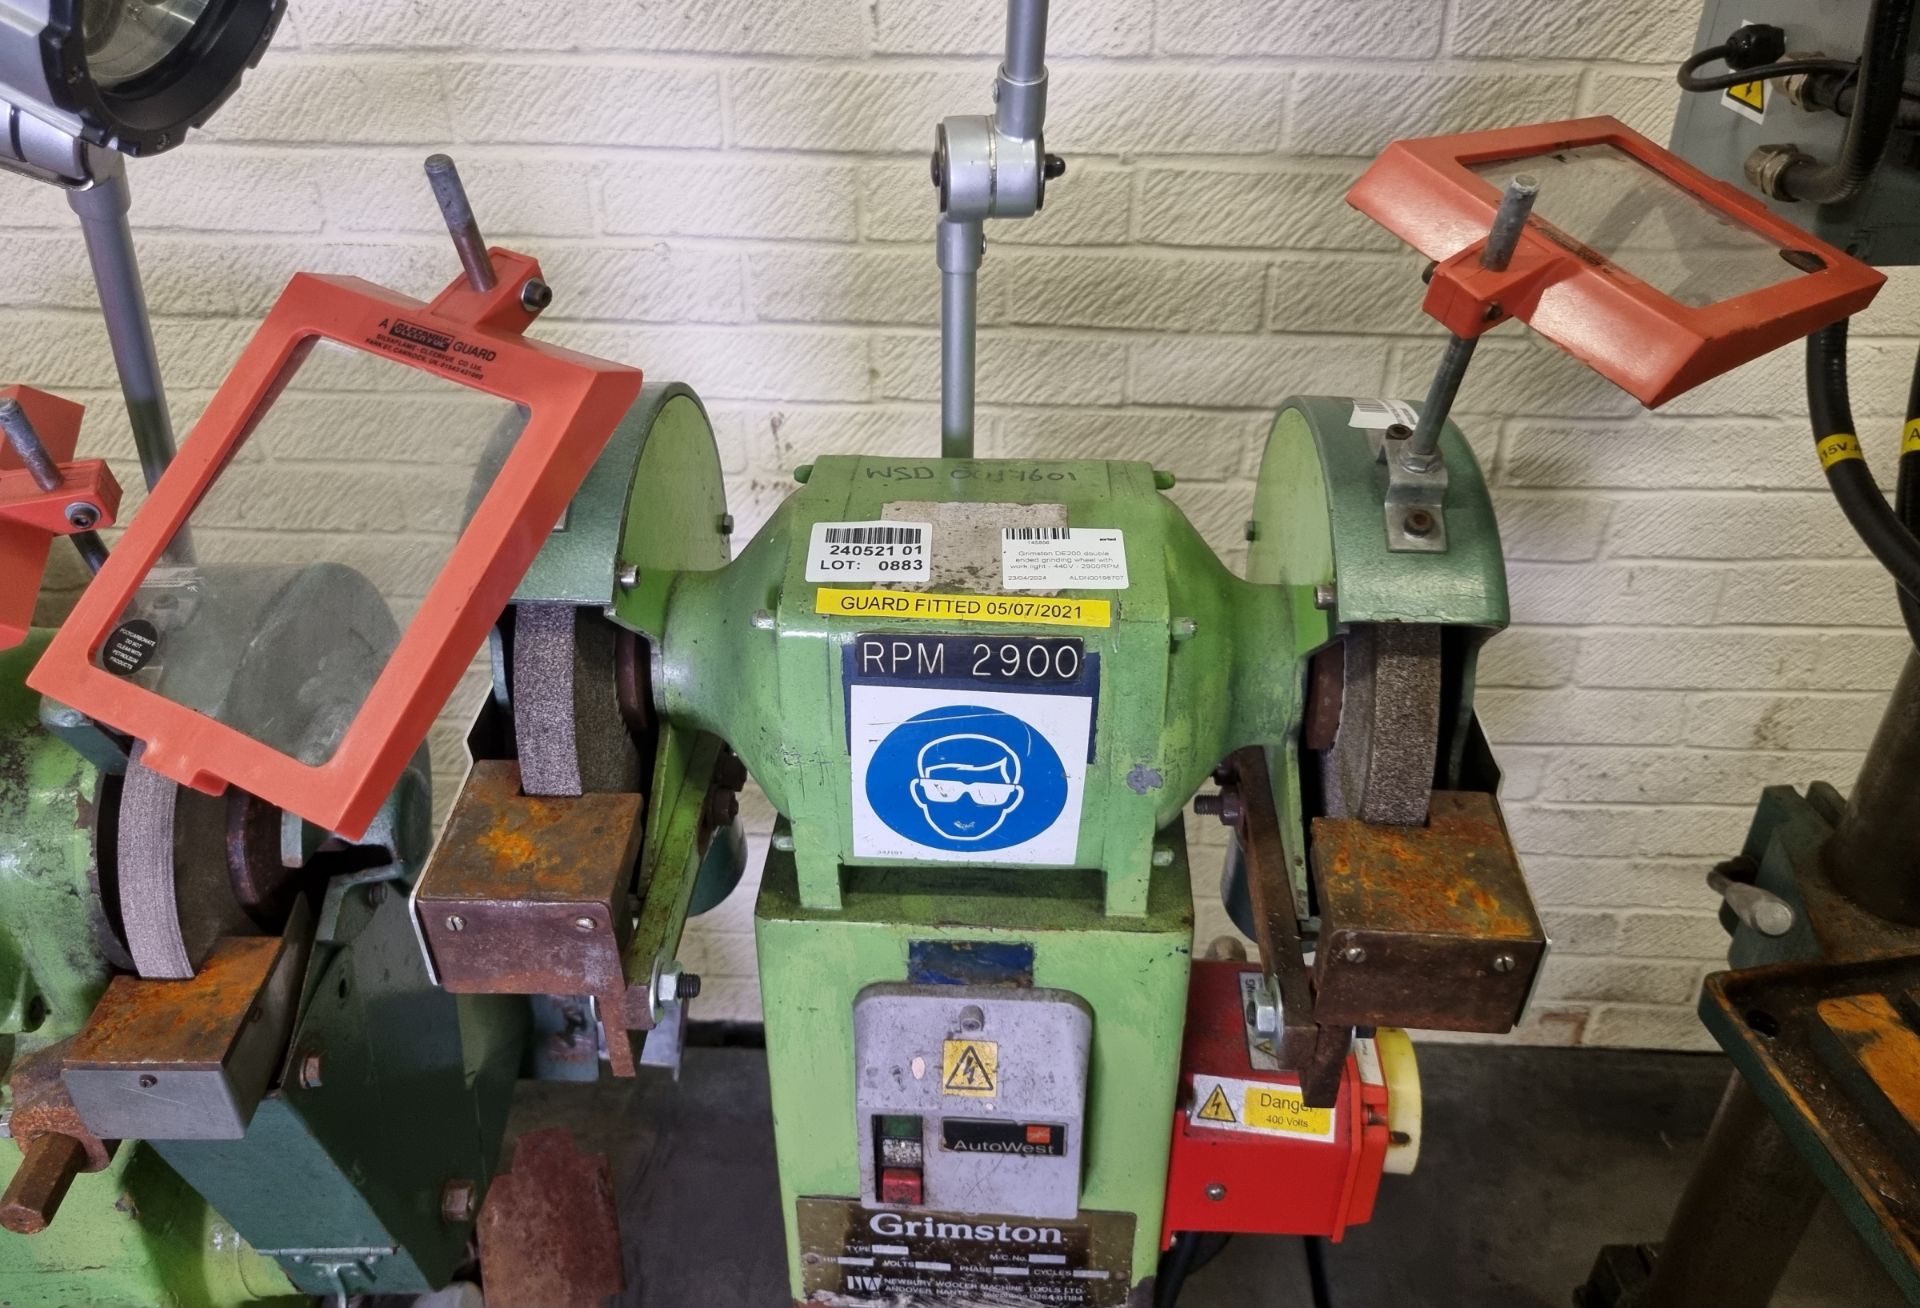 Grimston DE200 double ended grinding wheel with work light - 440V - 2900RPM - Image 3 of 8